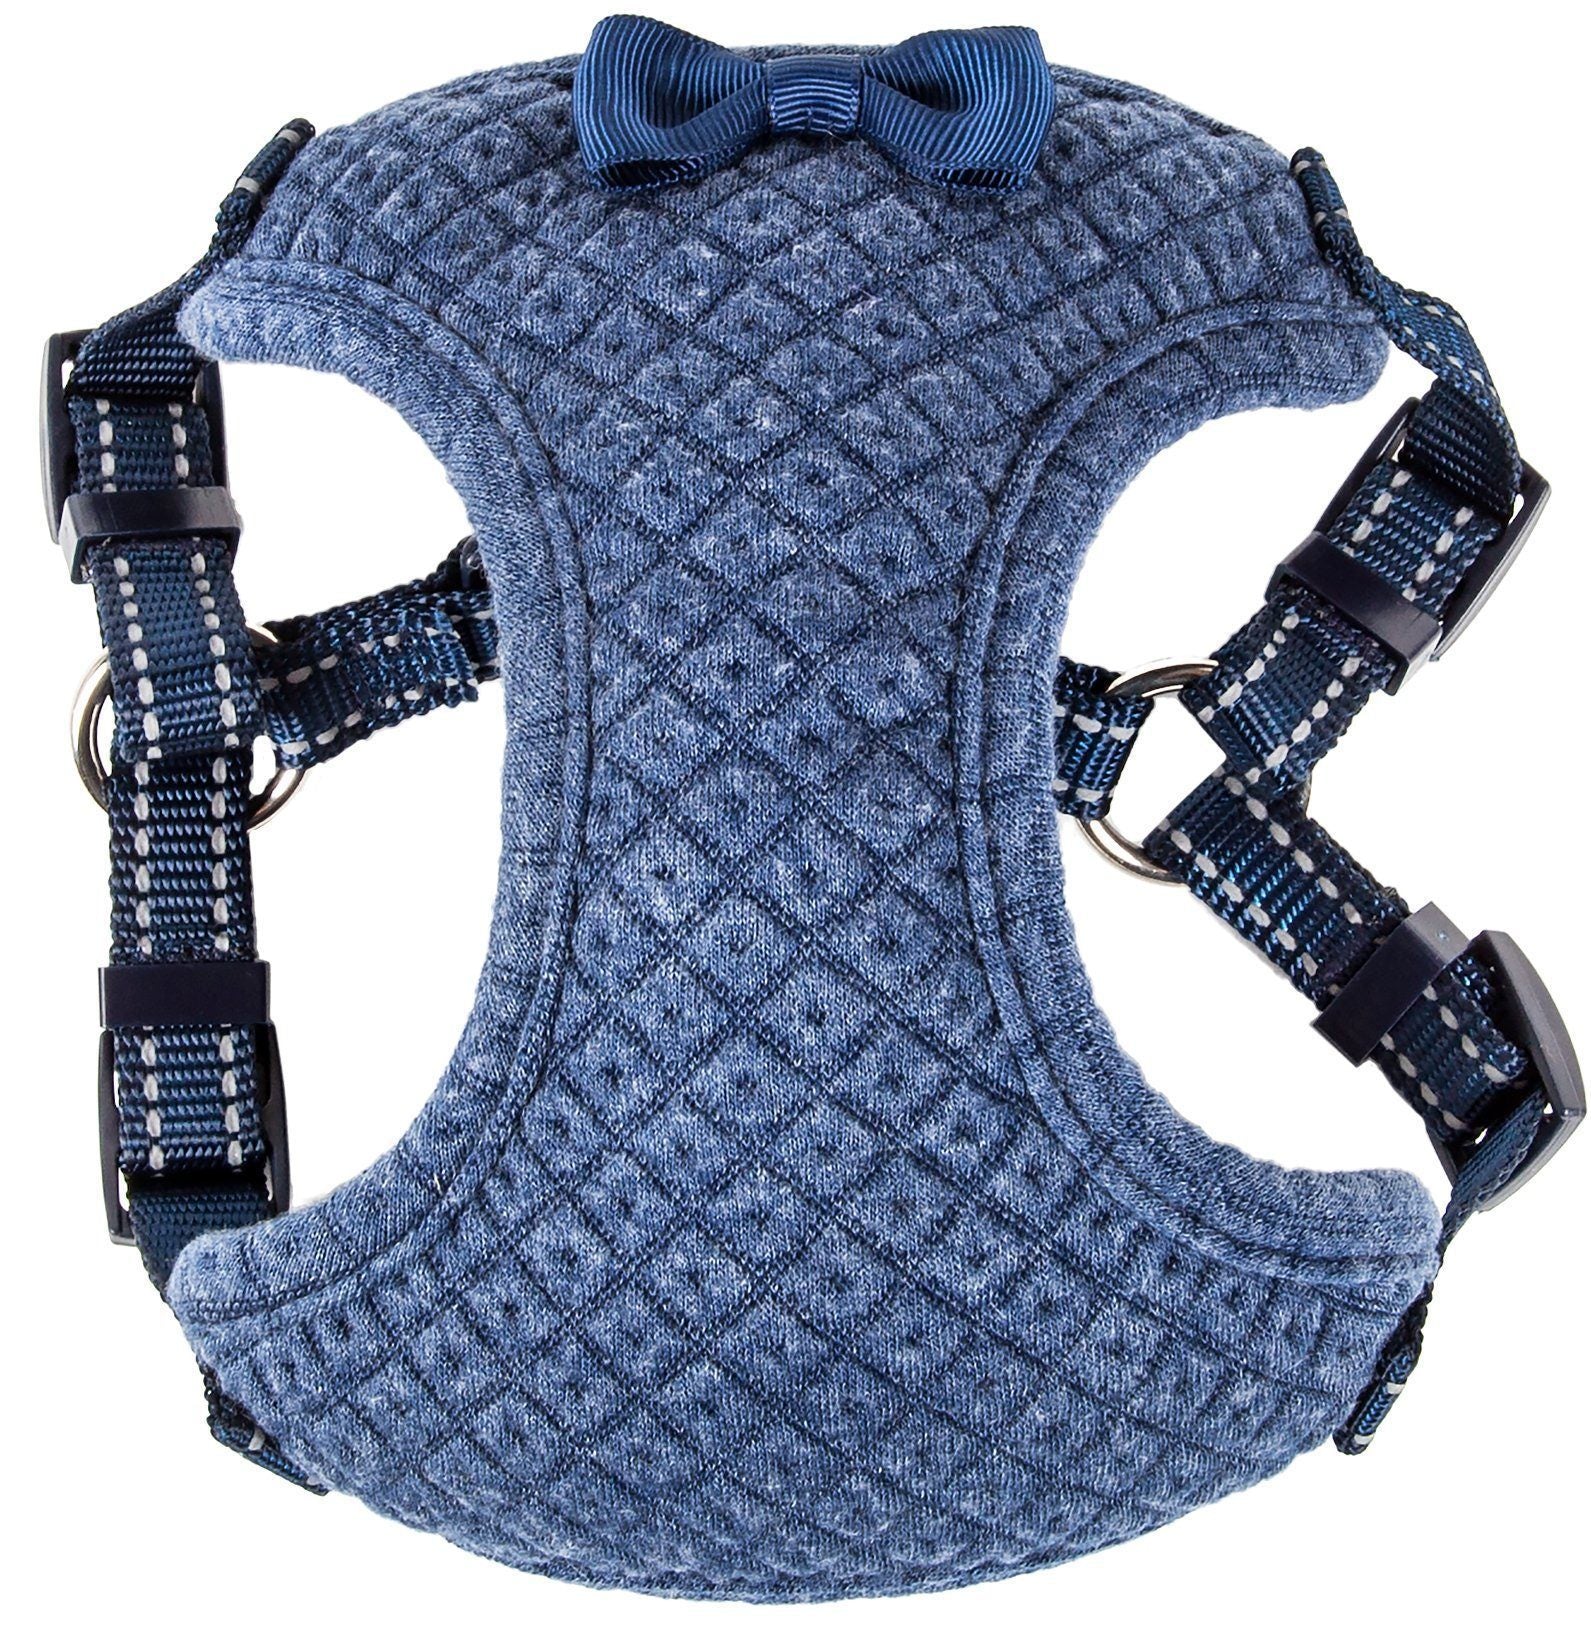 Pet Life ®  'Flam-Bowyant' Mesh Reversed and Adjustable Dog Harness  